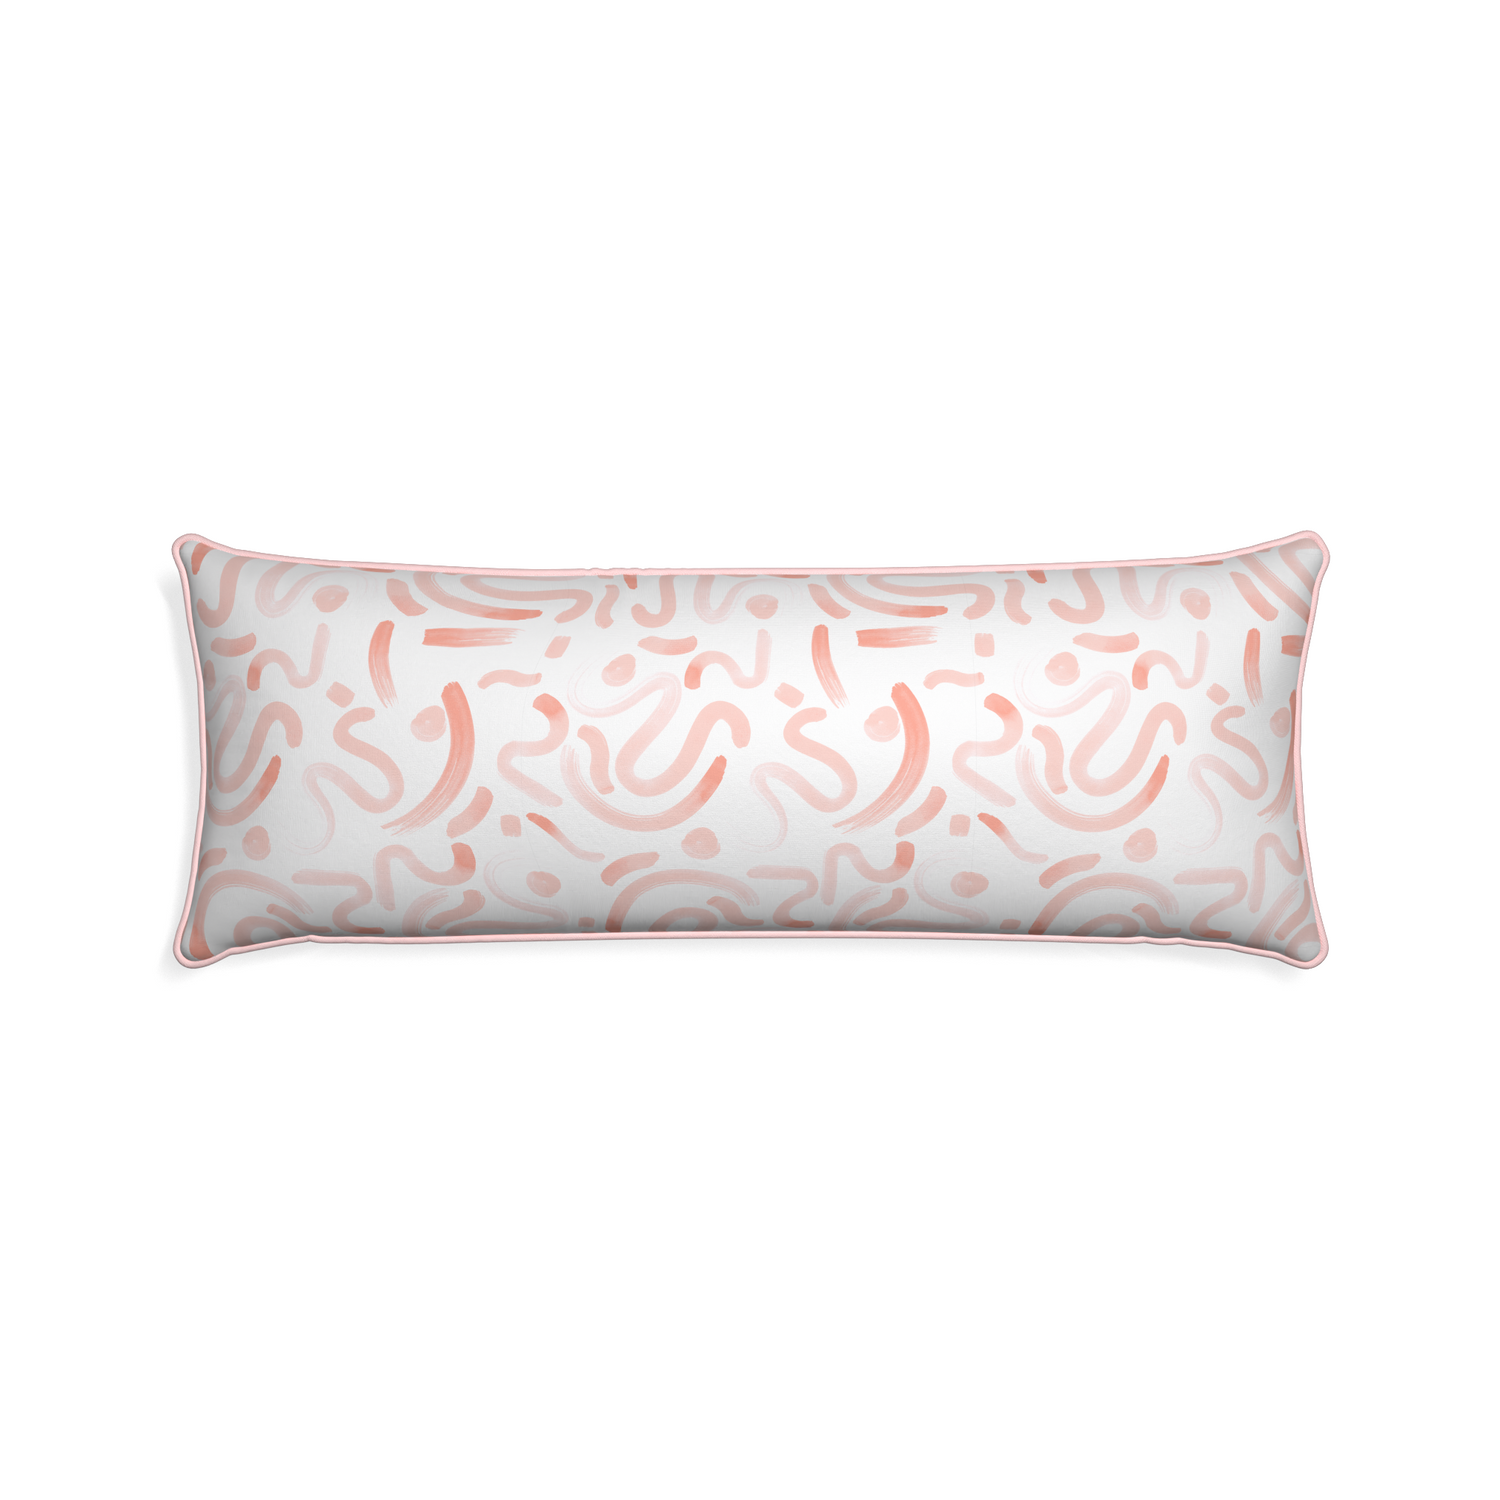 Xl-lumbar hockney pink custom pink graphicpillow with petal piping on white background